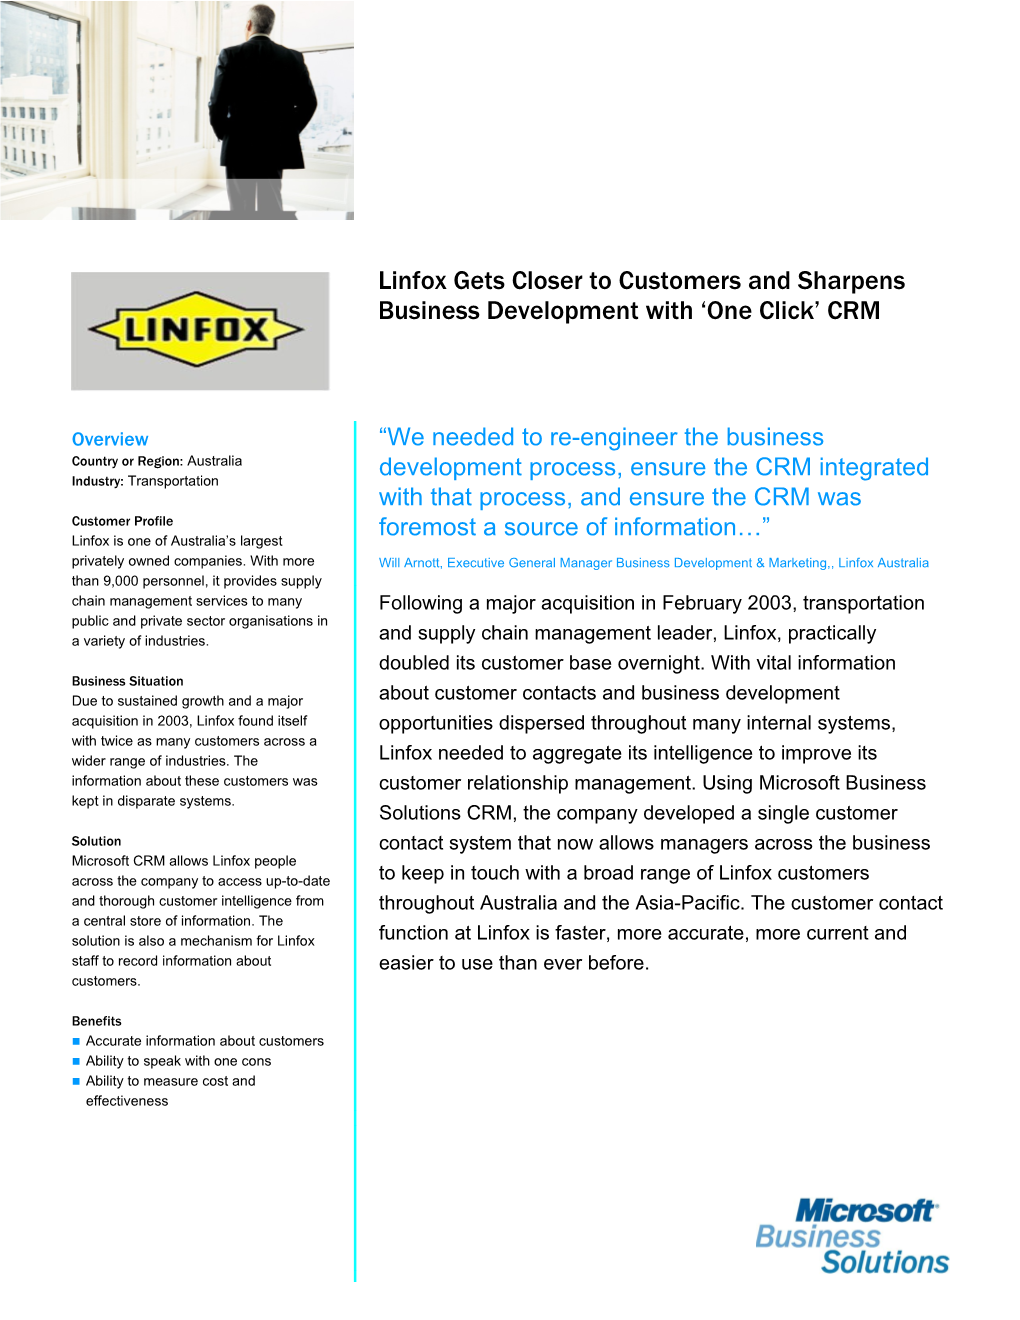 Linfox Gets Closer to Customers and Sharpens Business Development with One Click CR